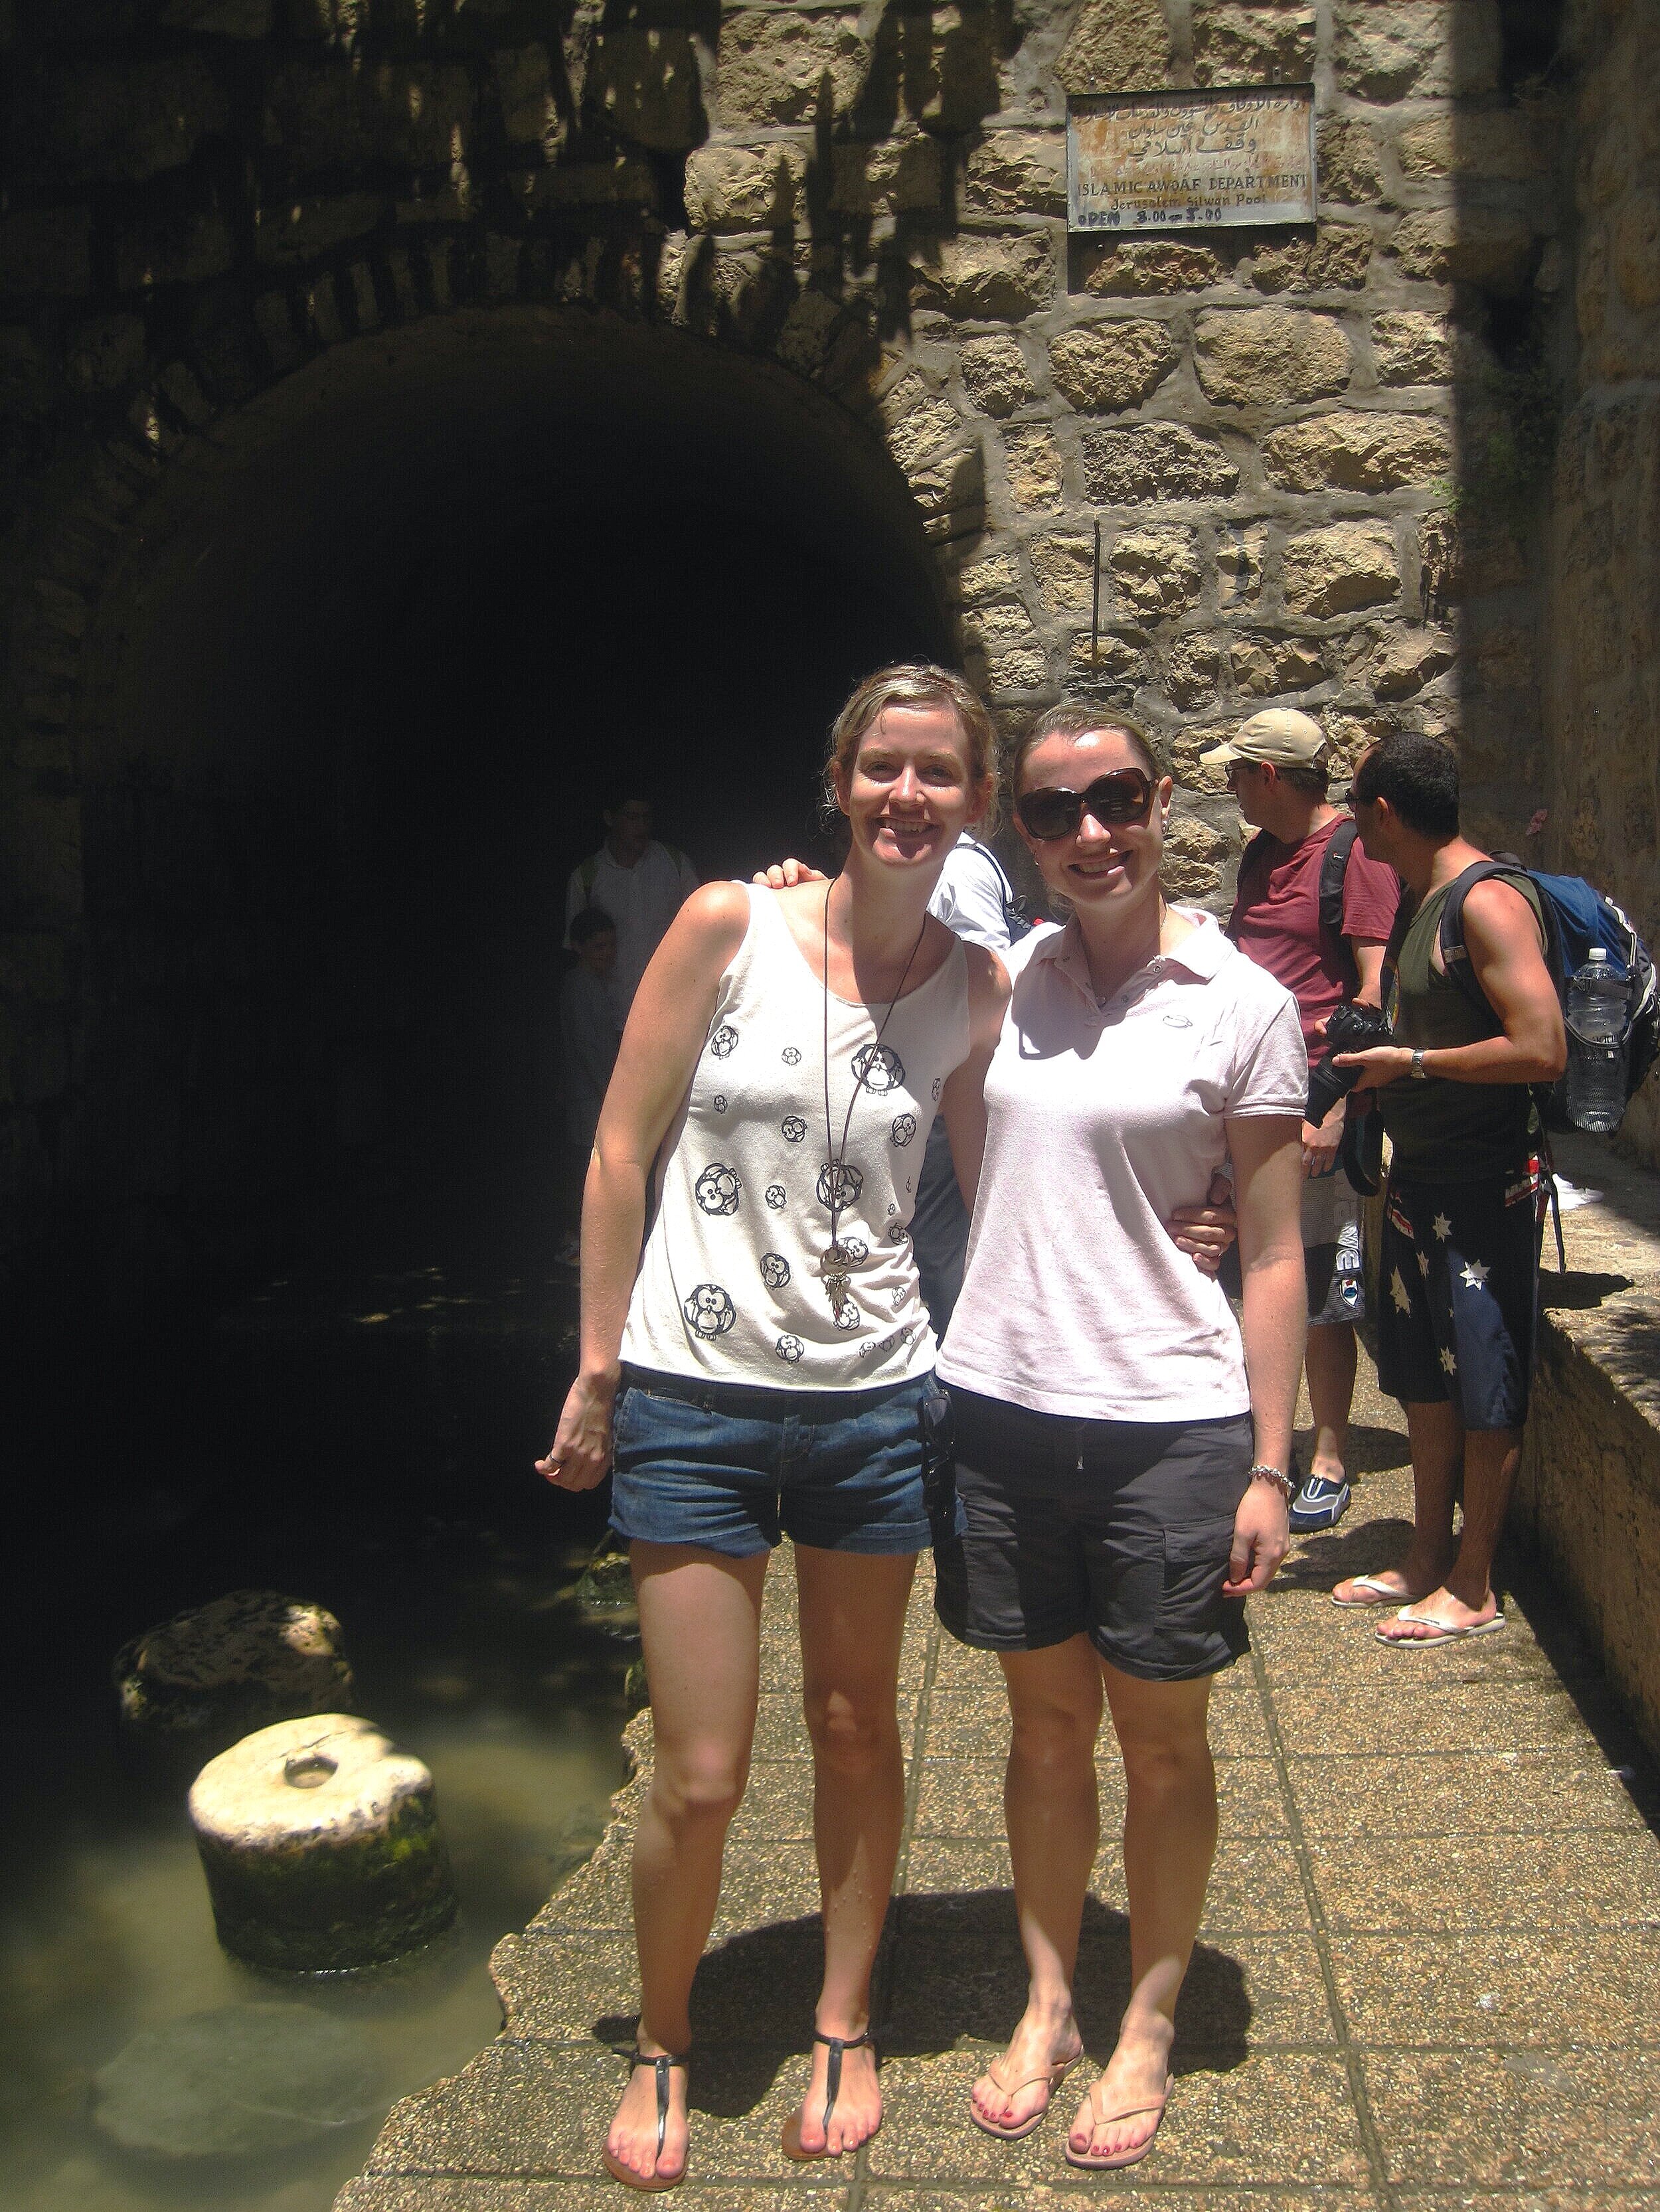 With Sharon in Jerusalem, walking through the ancient Silwan pool, which protected Jerusalem’s water supply from the Assyrians.